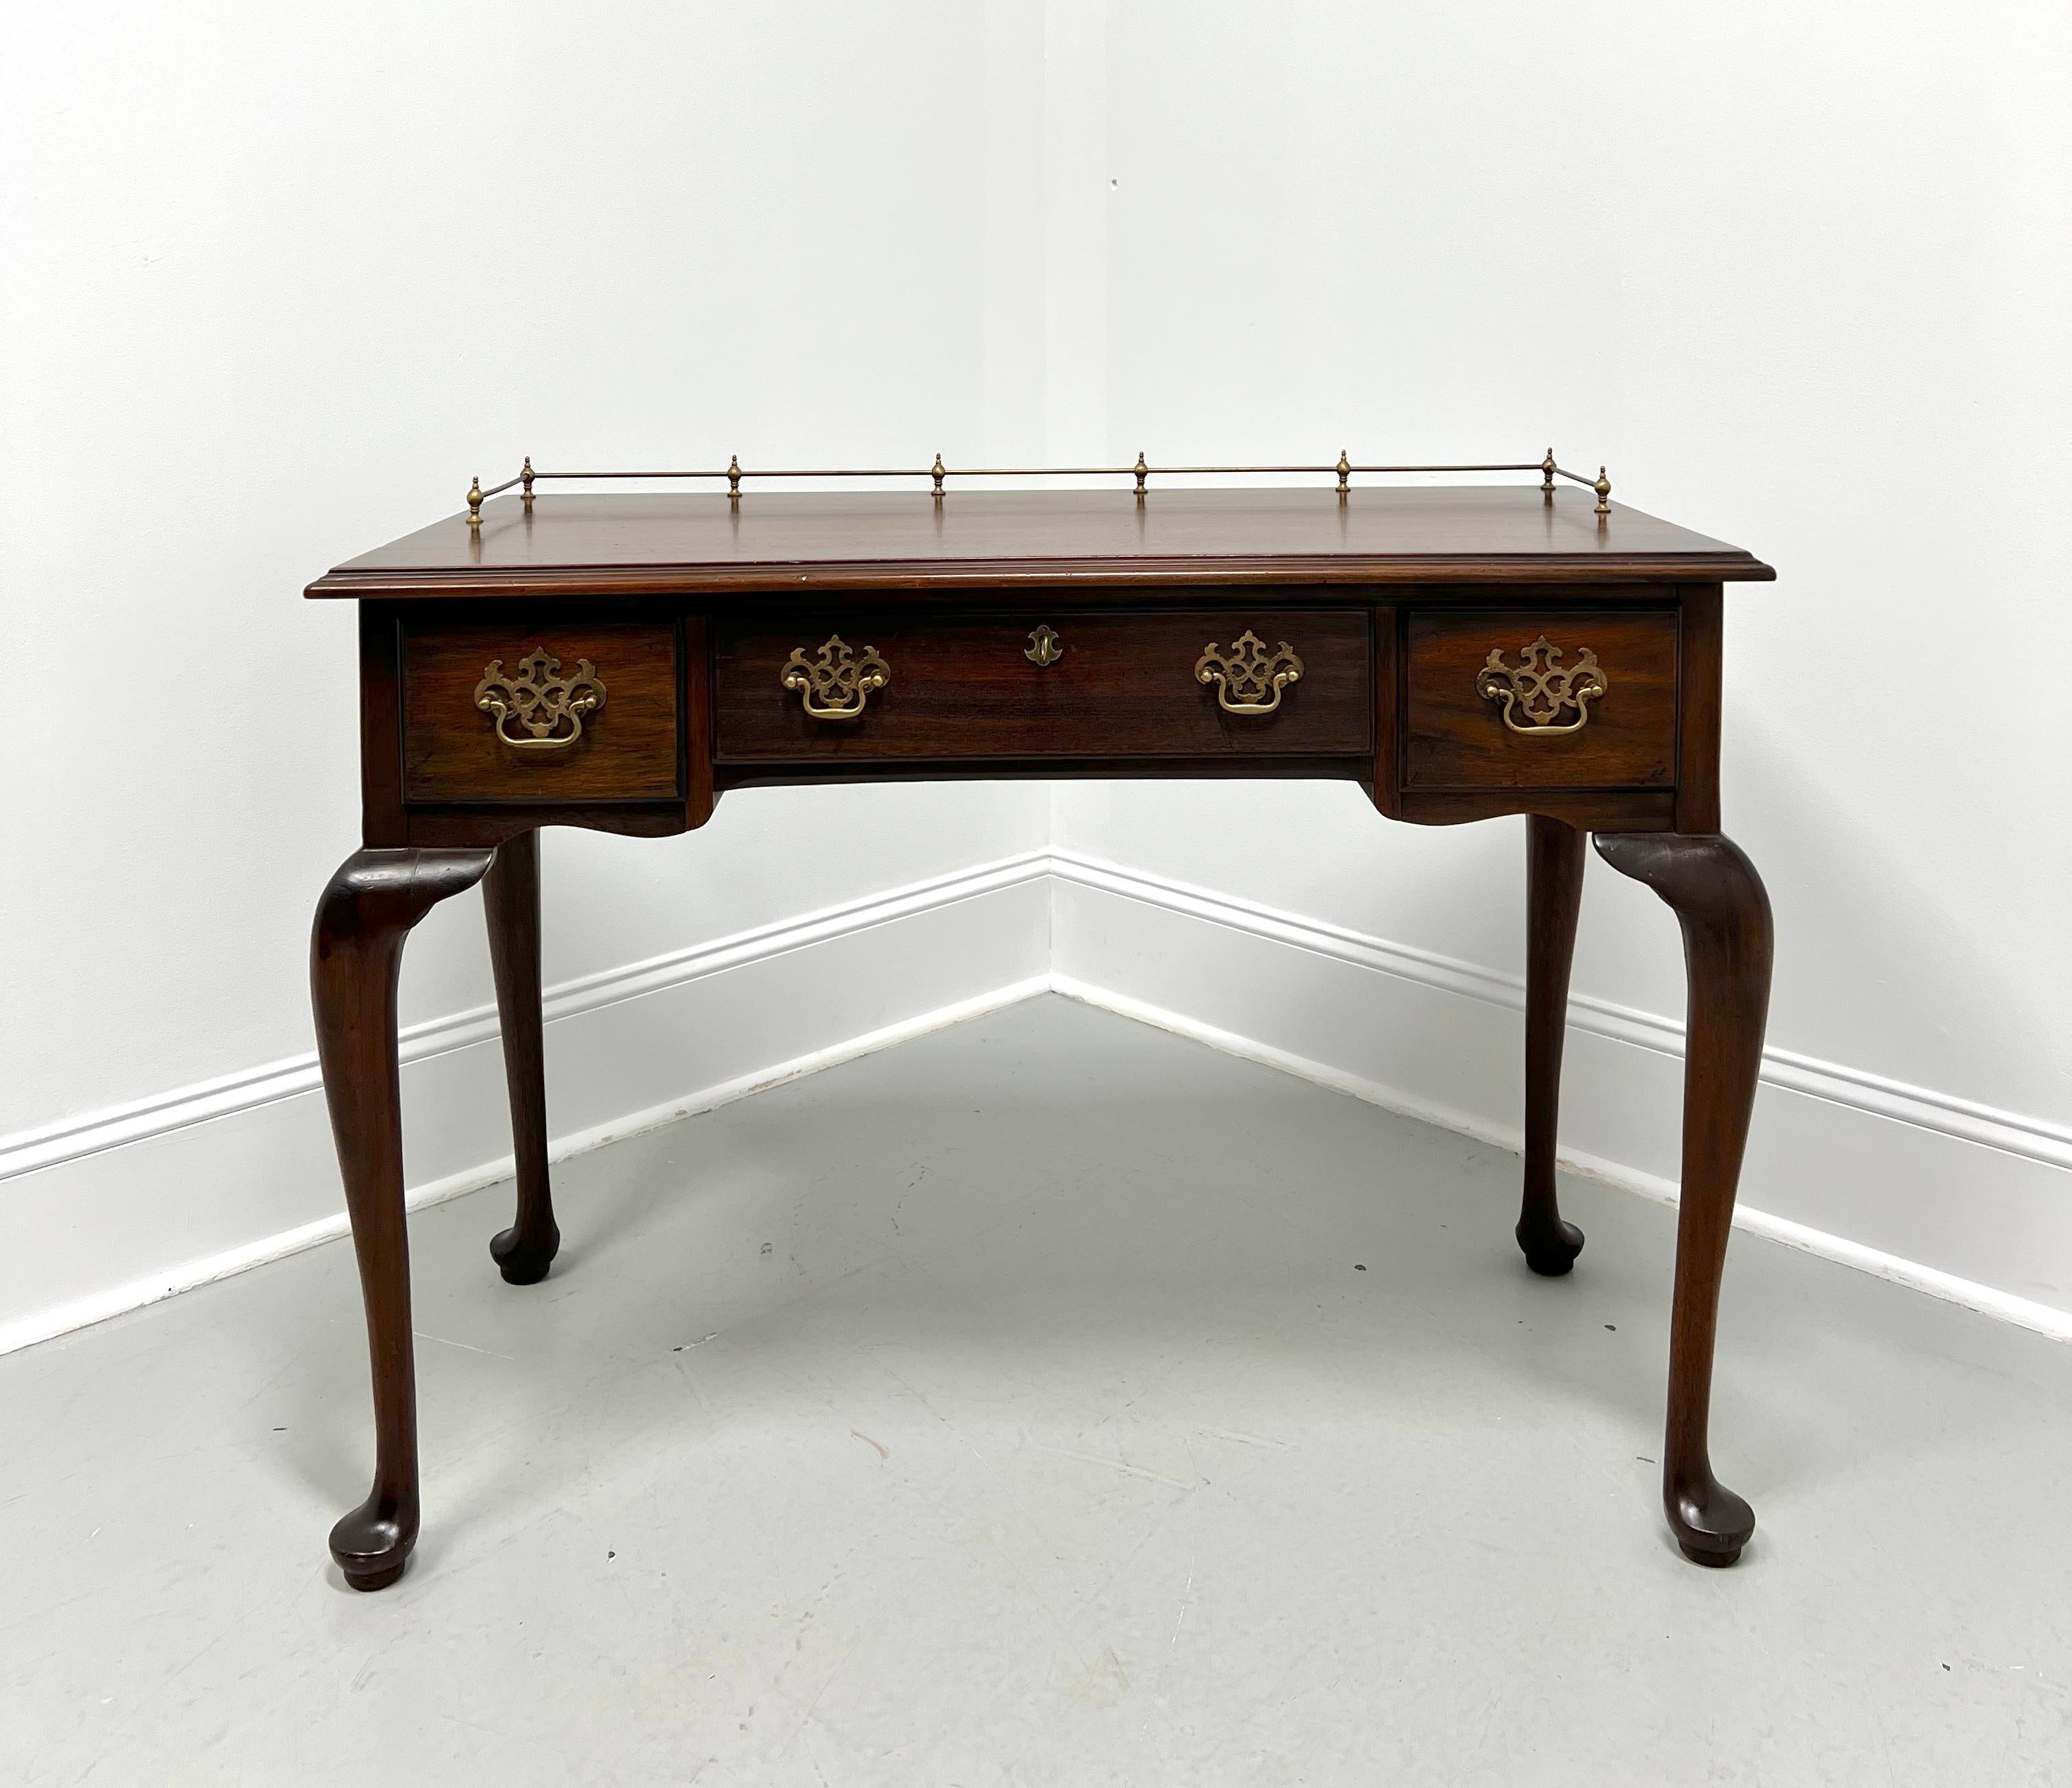 A Queen Anne style writing desk by Henkel Harris, of Winchester, Virginia, USA. Solid mahogany with a distressed finish, decorative brass hardware, an ogee edge to the top, brass rail gallery, cabriole legs, and pad feet. Features one large lockable